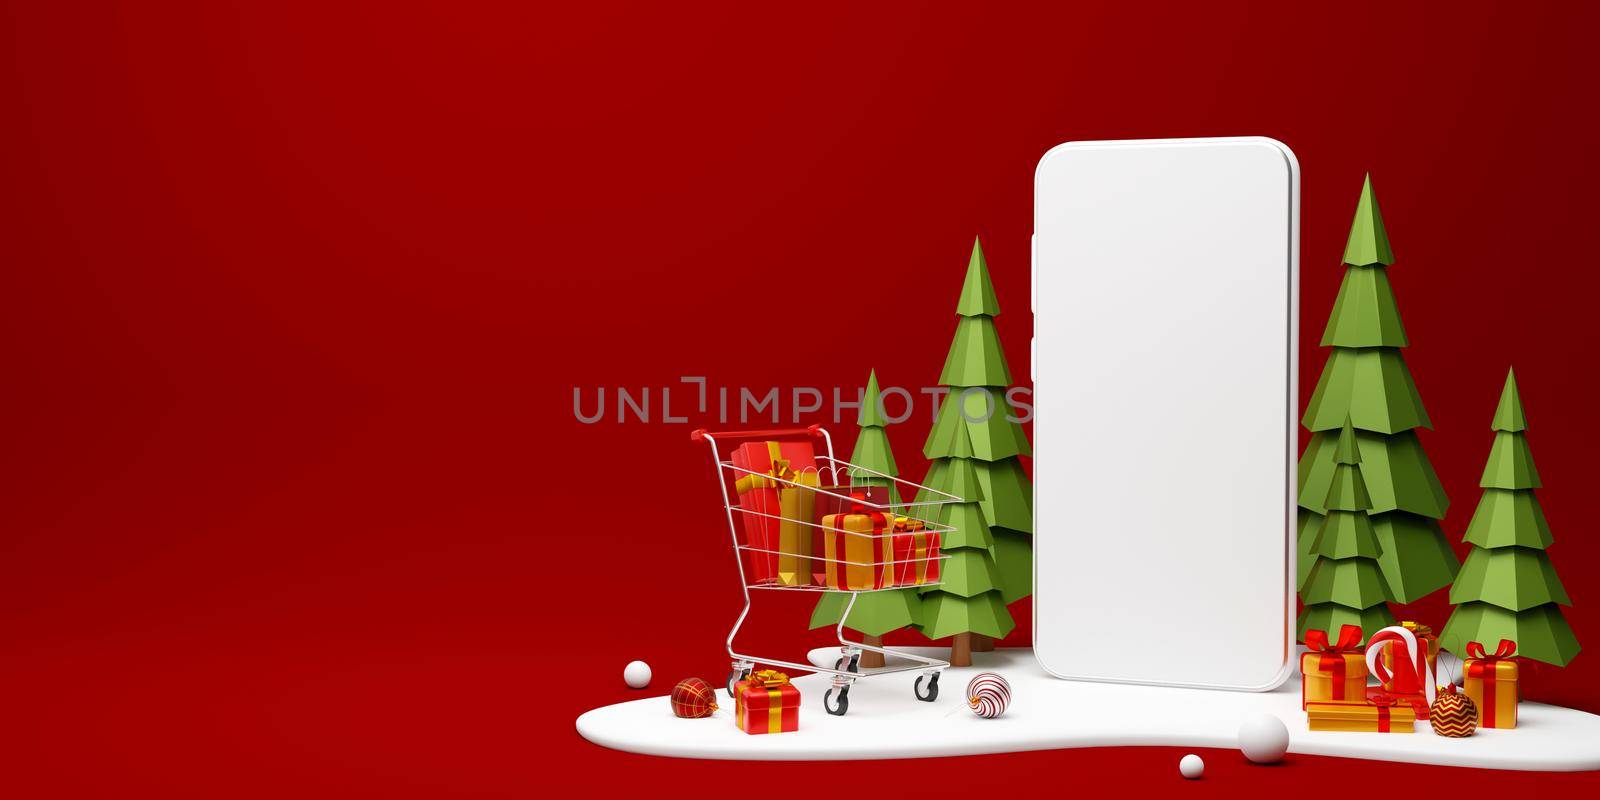 Scene of Smartphone with Christmas gift and shopping cart for shopping online advertisement, 3d illustration